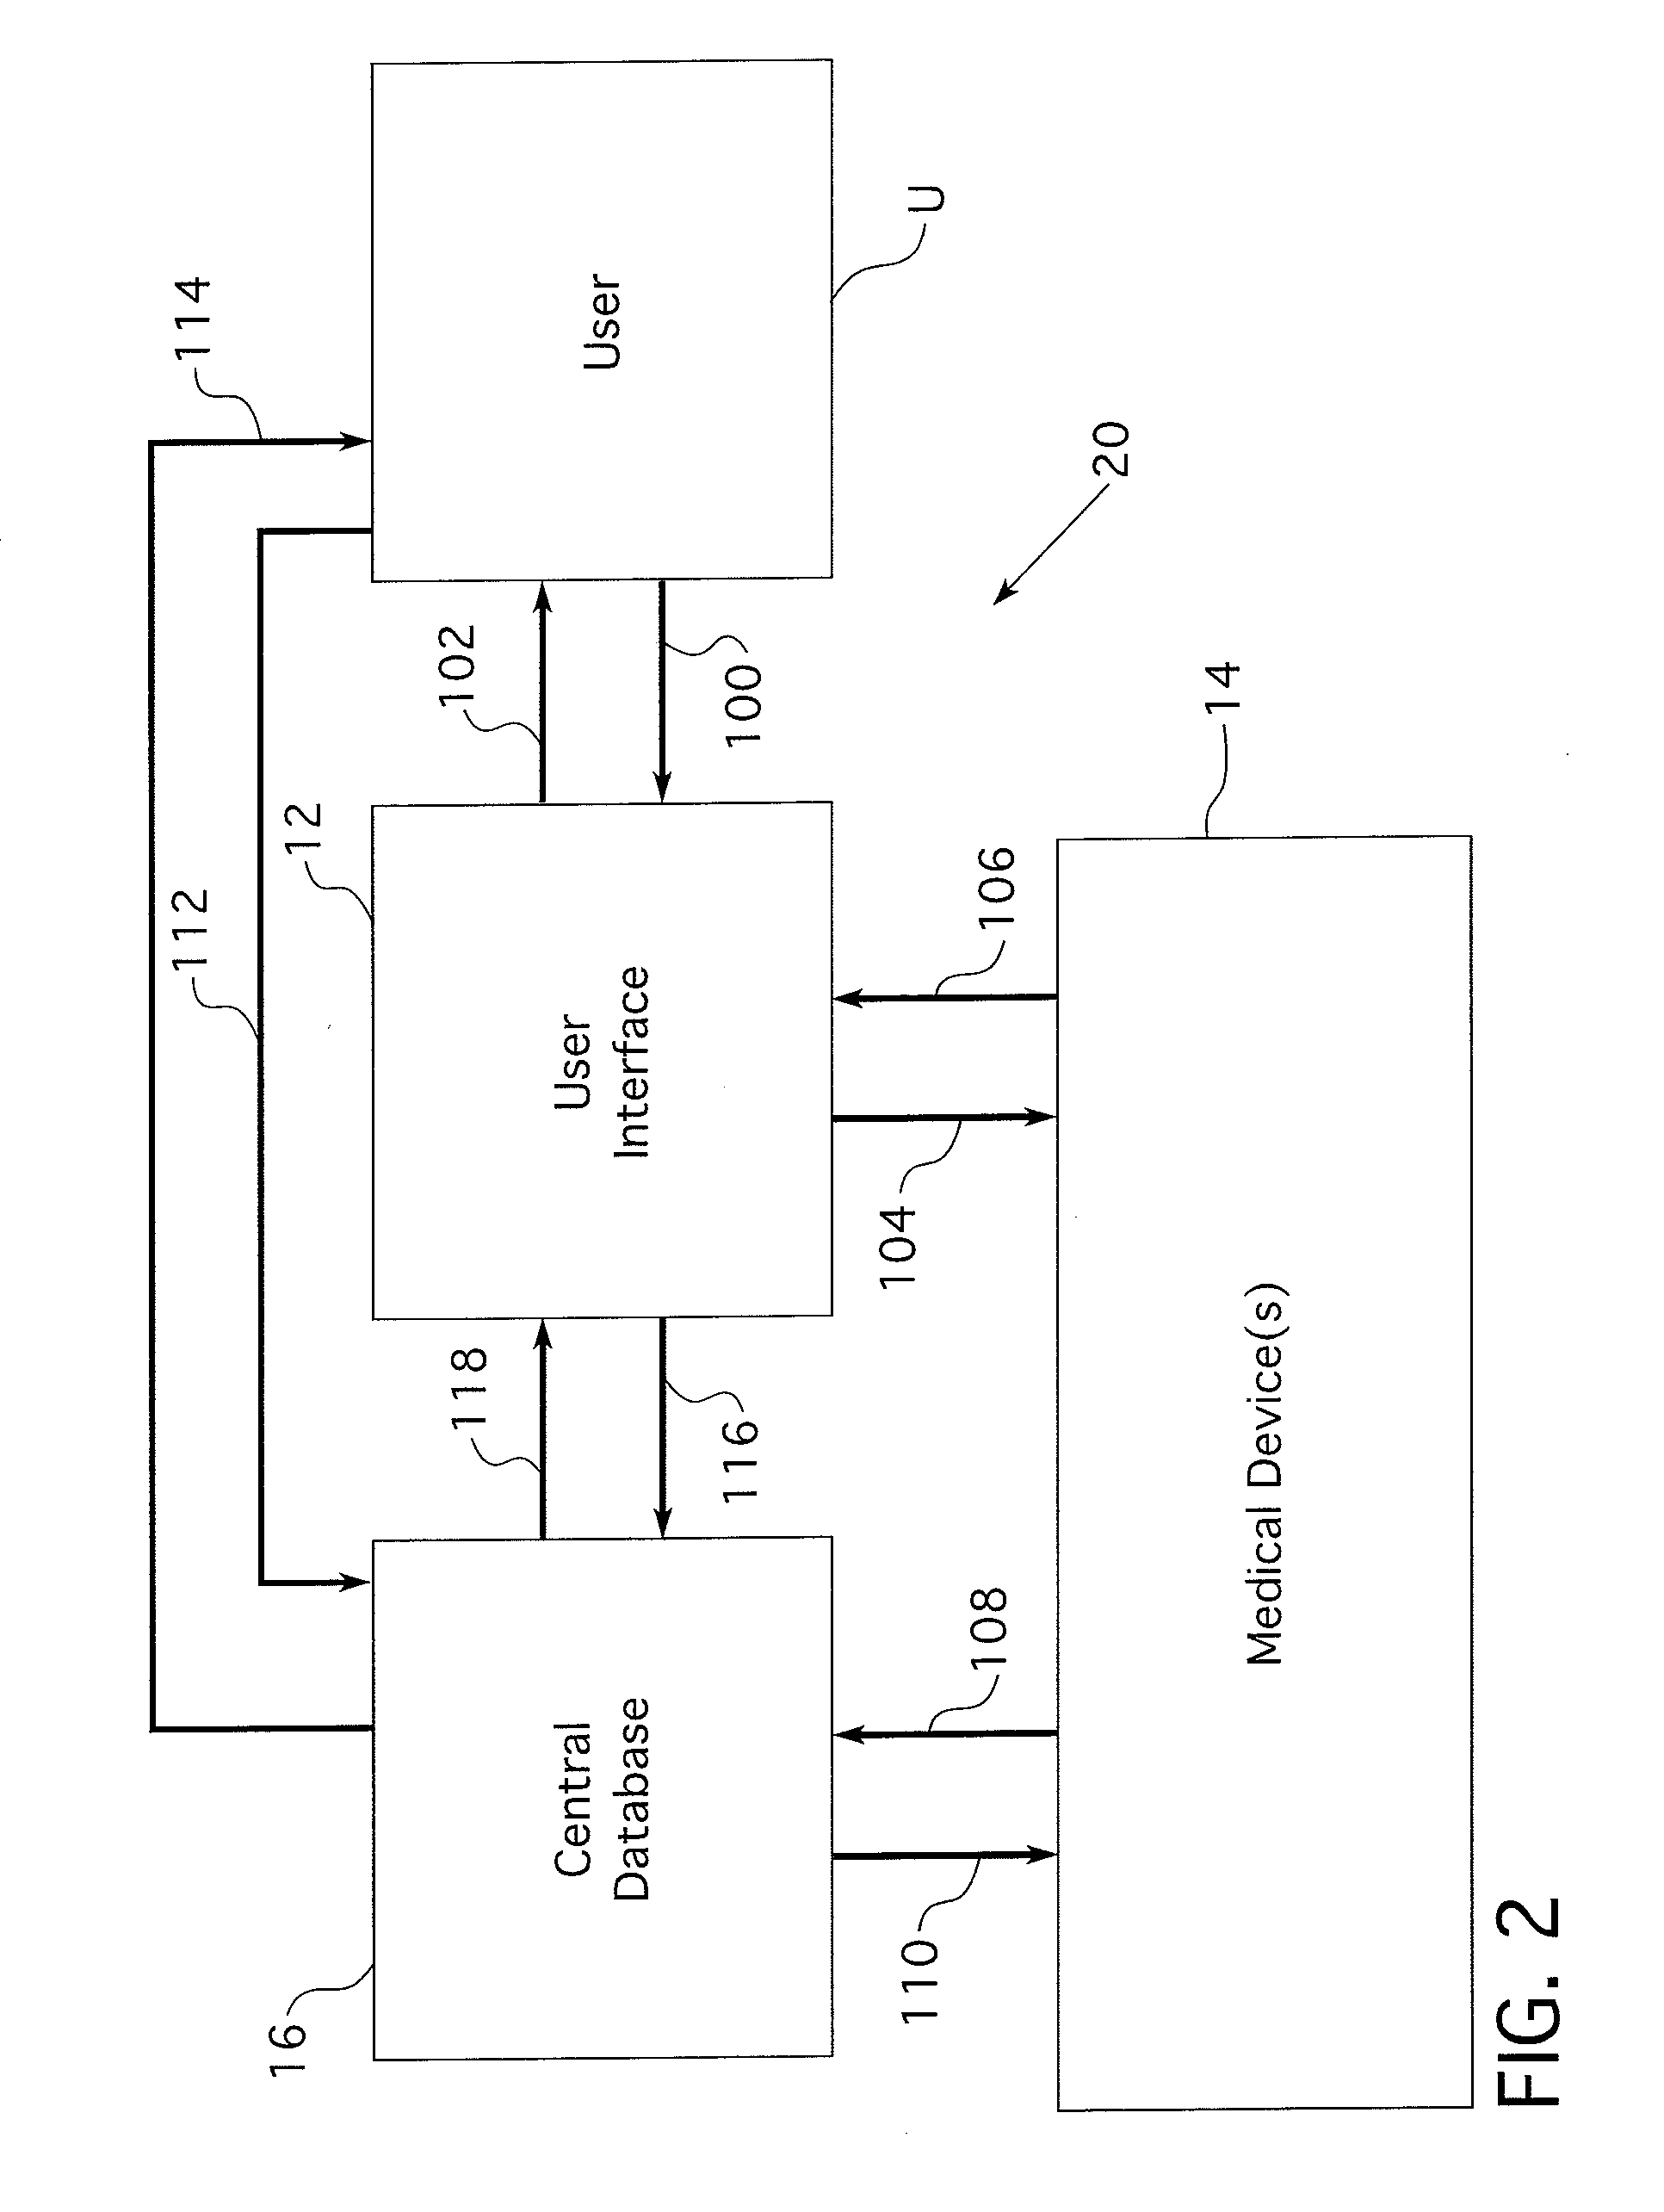 System and method for automated benchmarking for the recognition of best medical practices and products and for establishing standards for medical procedures